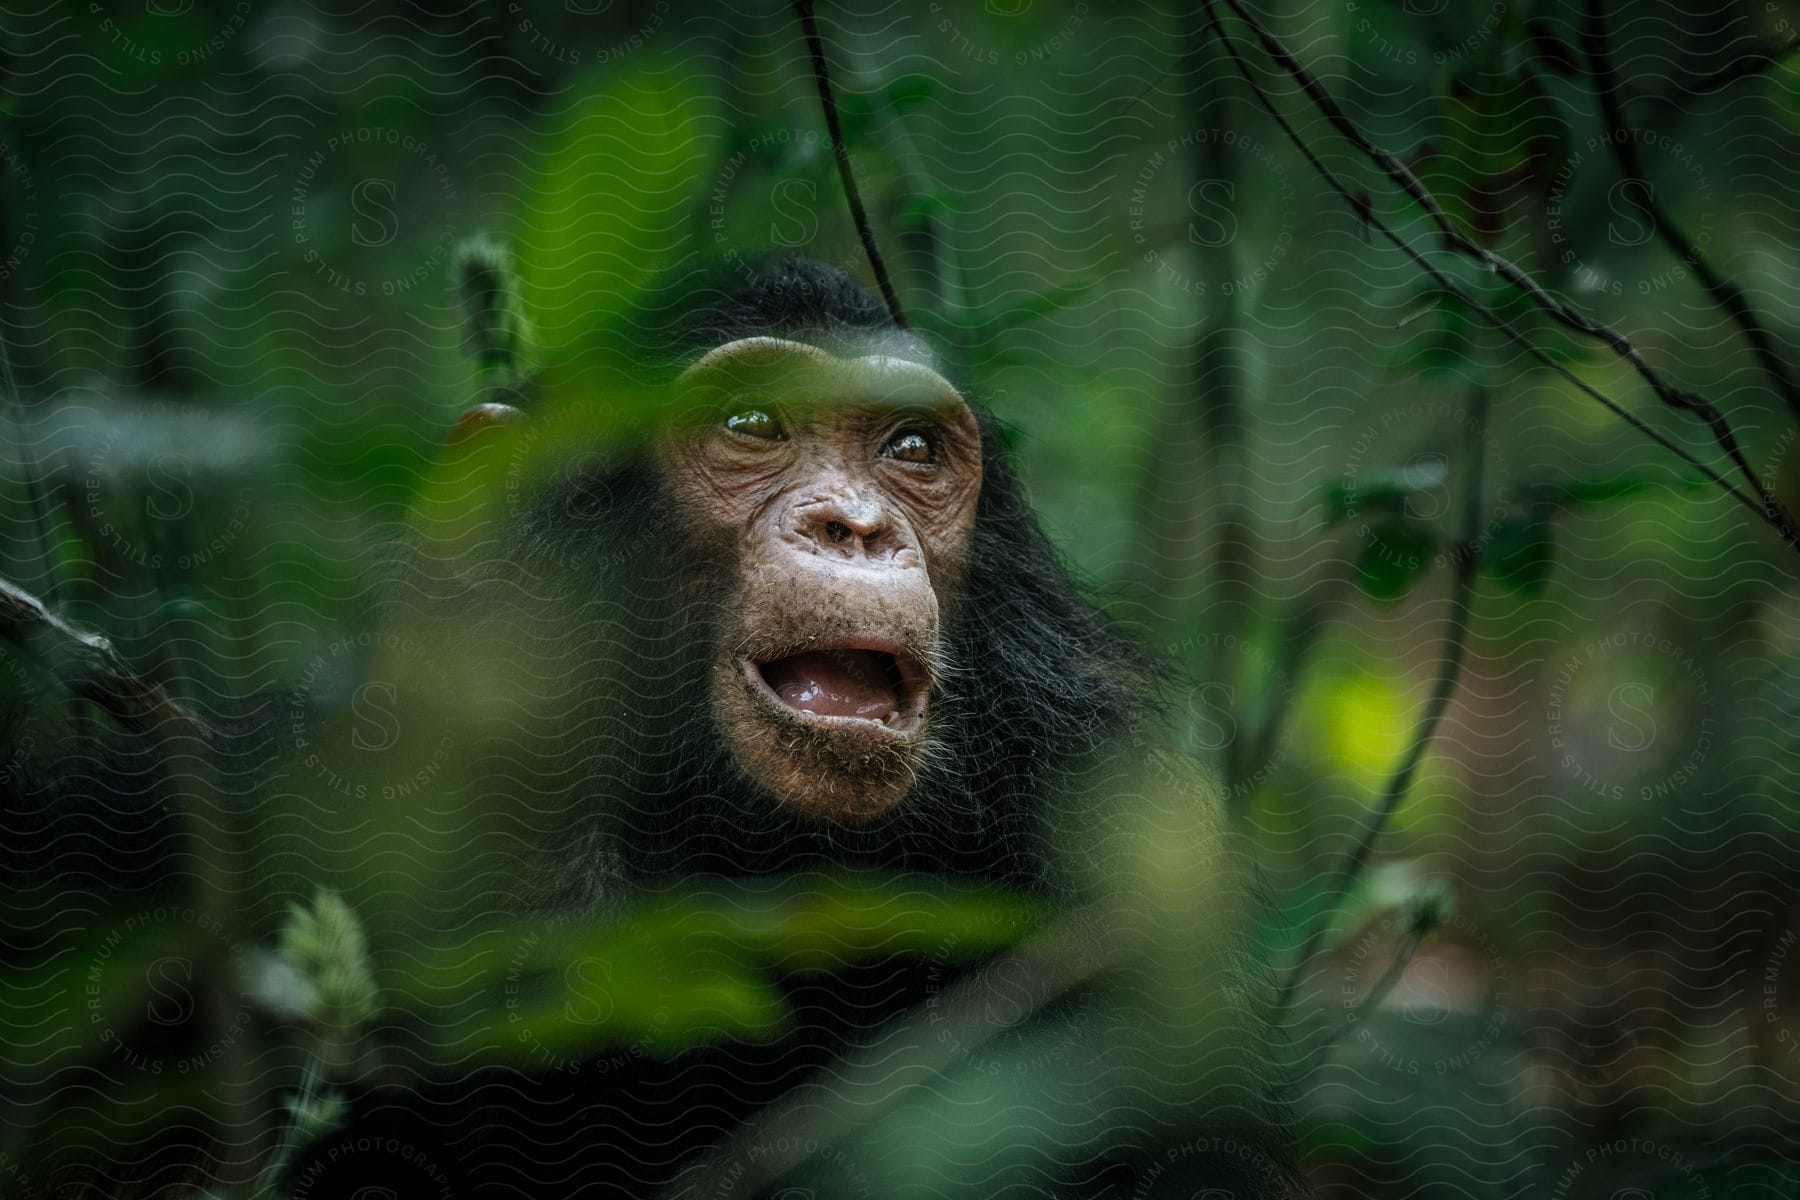 An image of a monkey in the forest